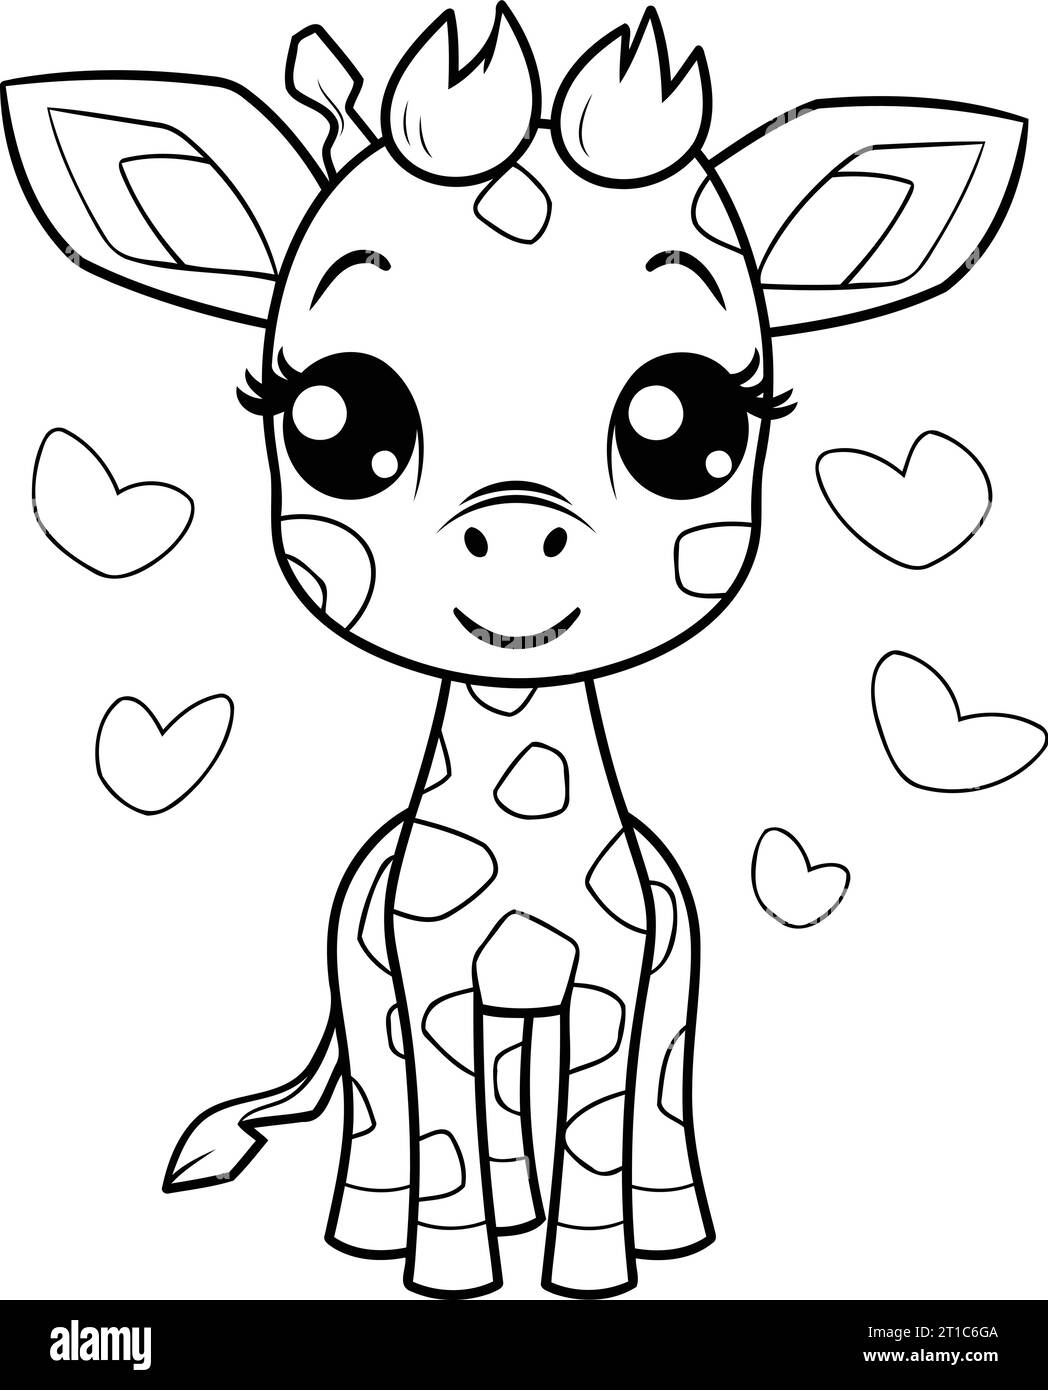 Coloring book for children. Giraffe with hearts. Vector illustration Stock Vector